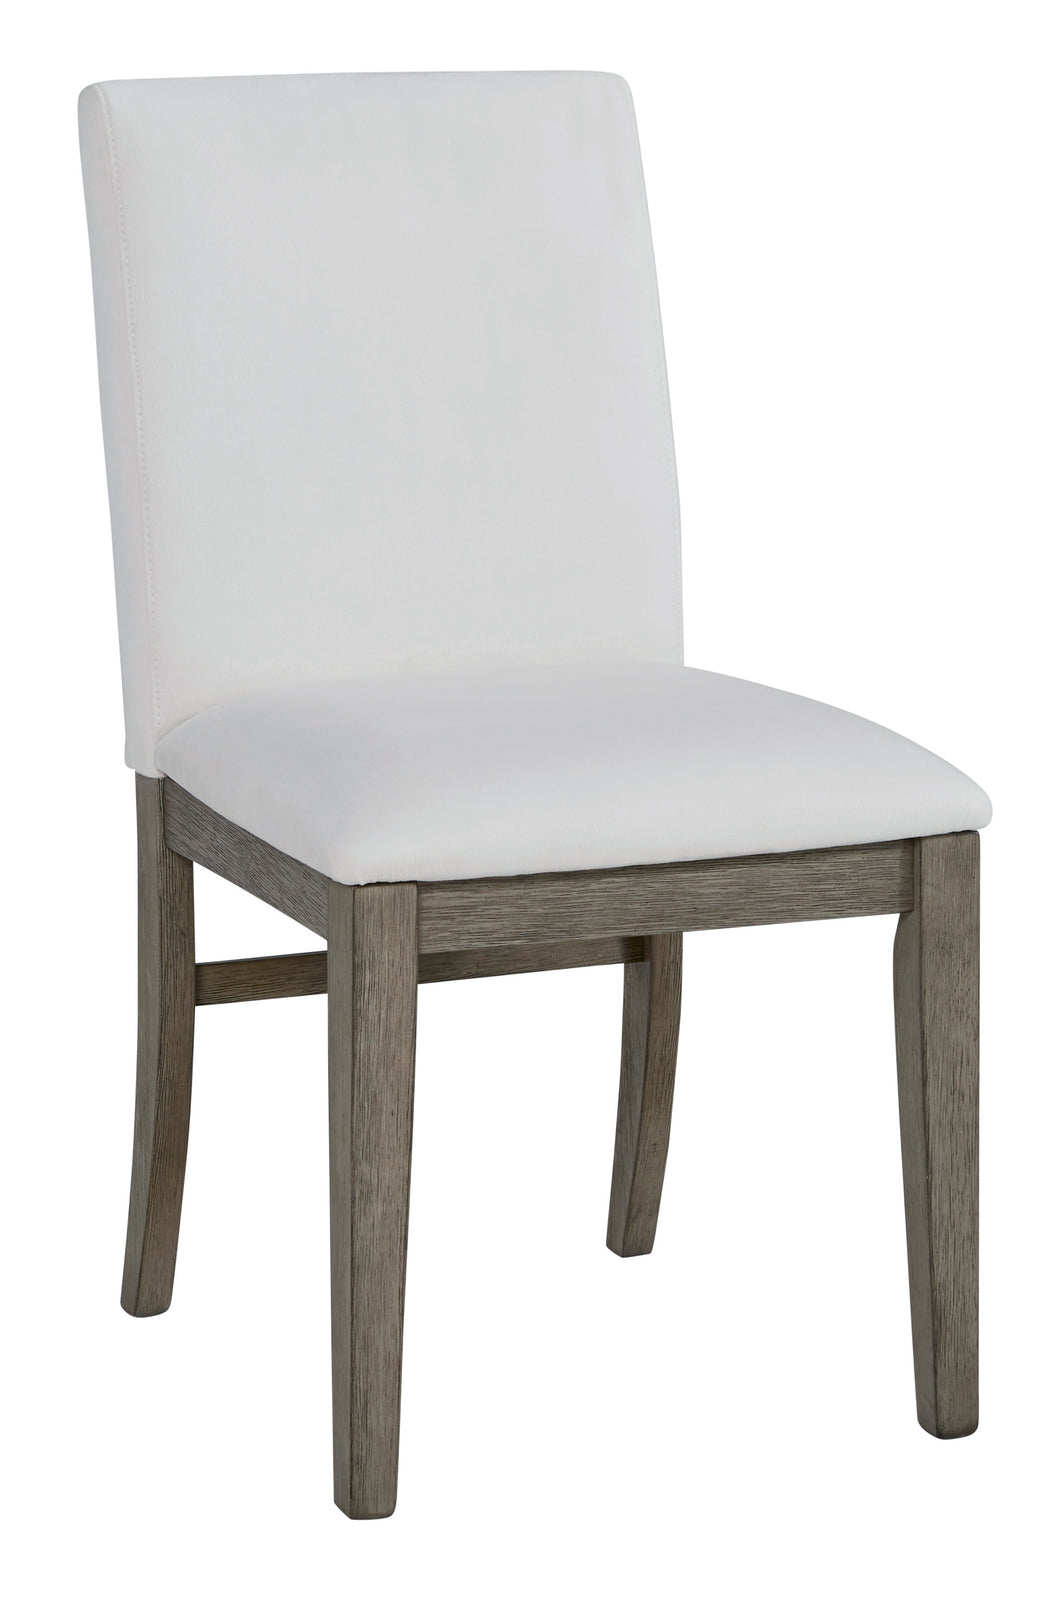 Becca Dining Chairs